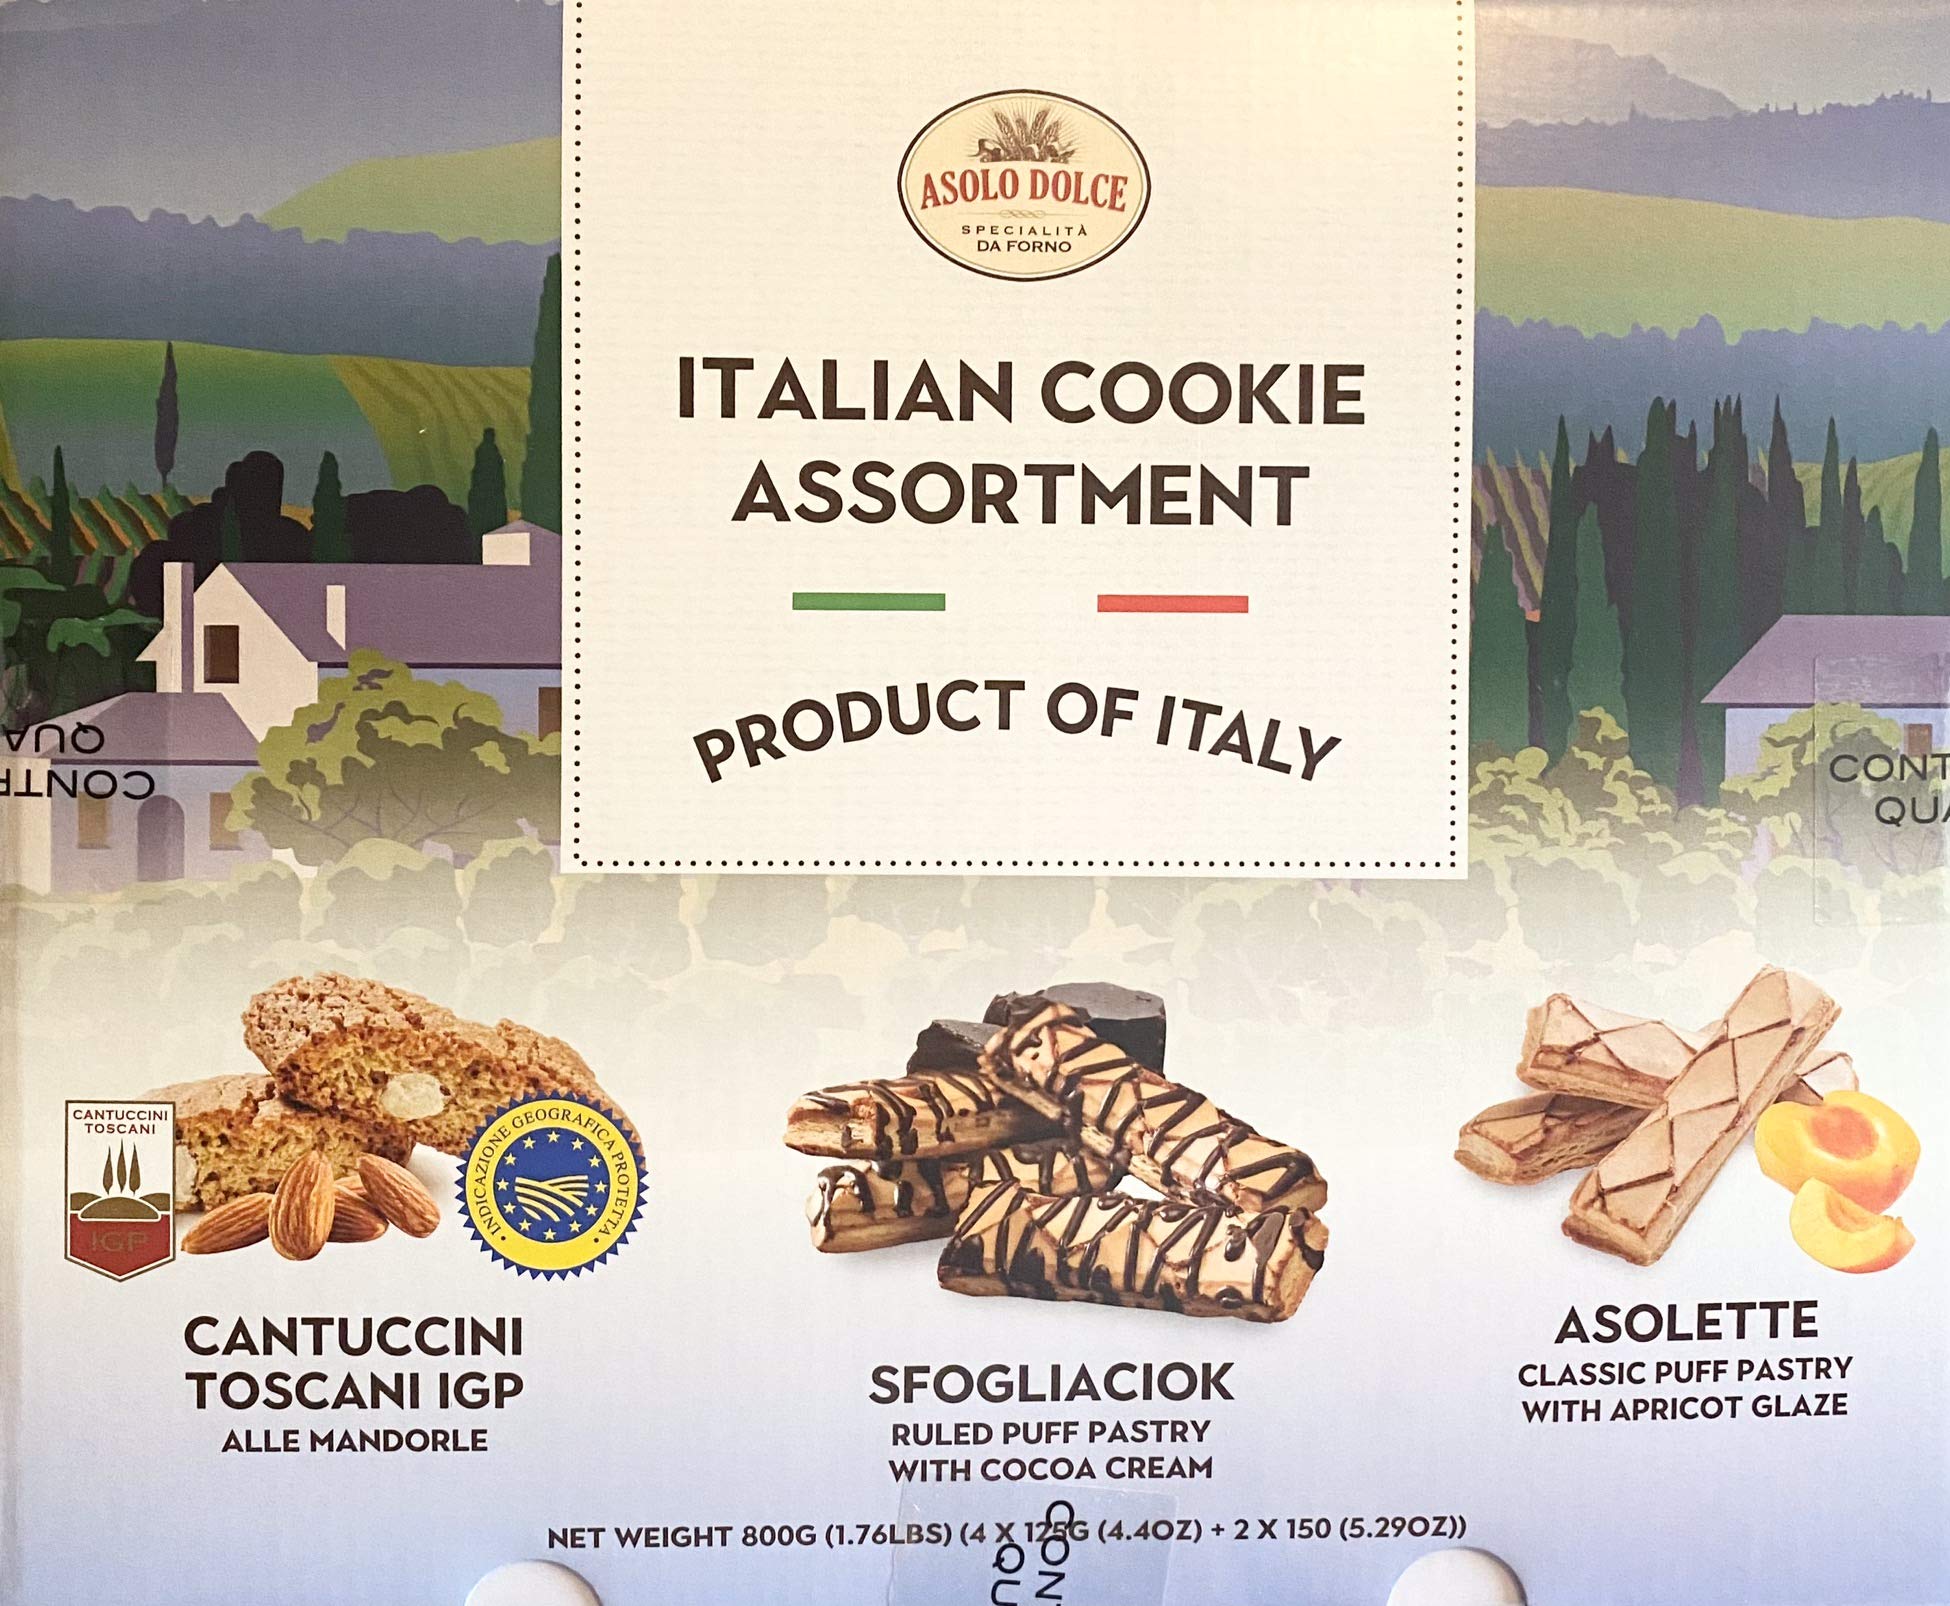 ASOLO DOLcE ITALIAN cOOKIE ASSORTMENT